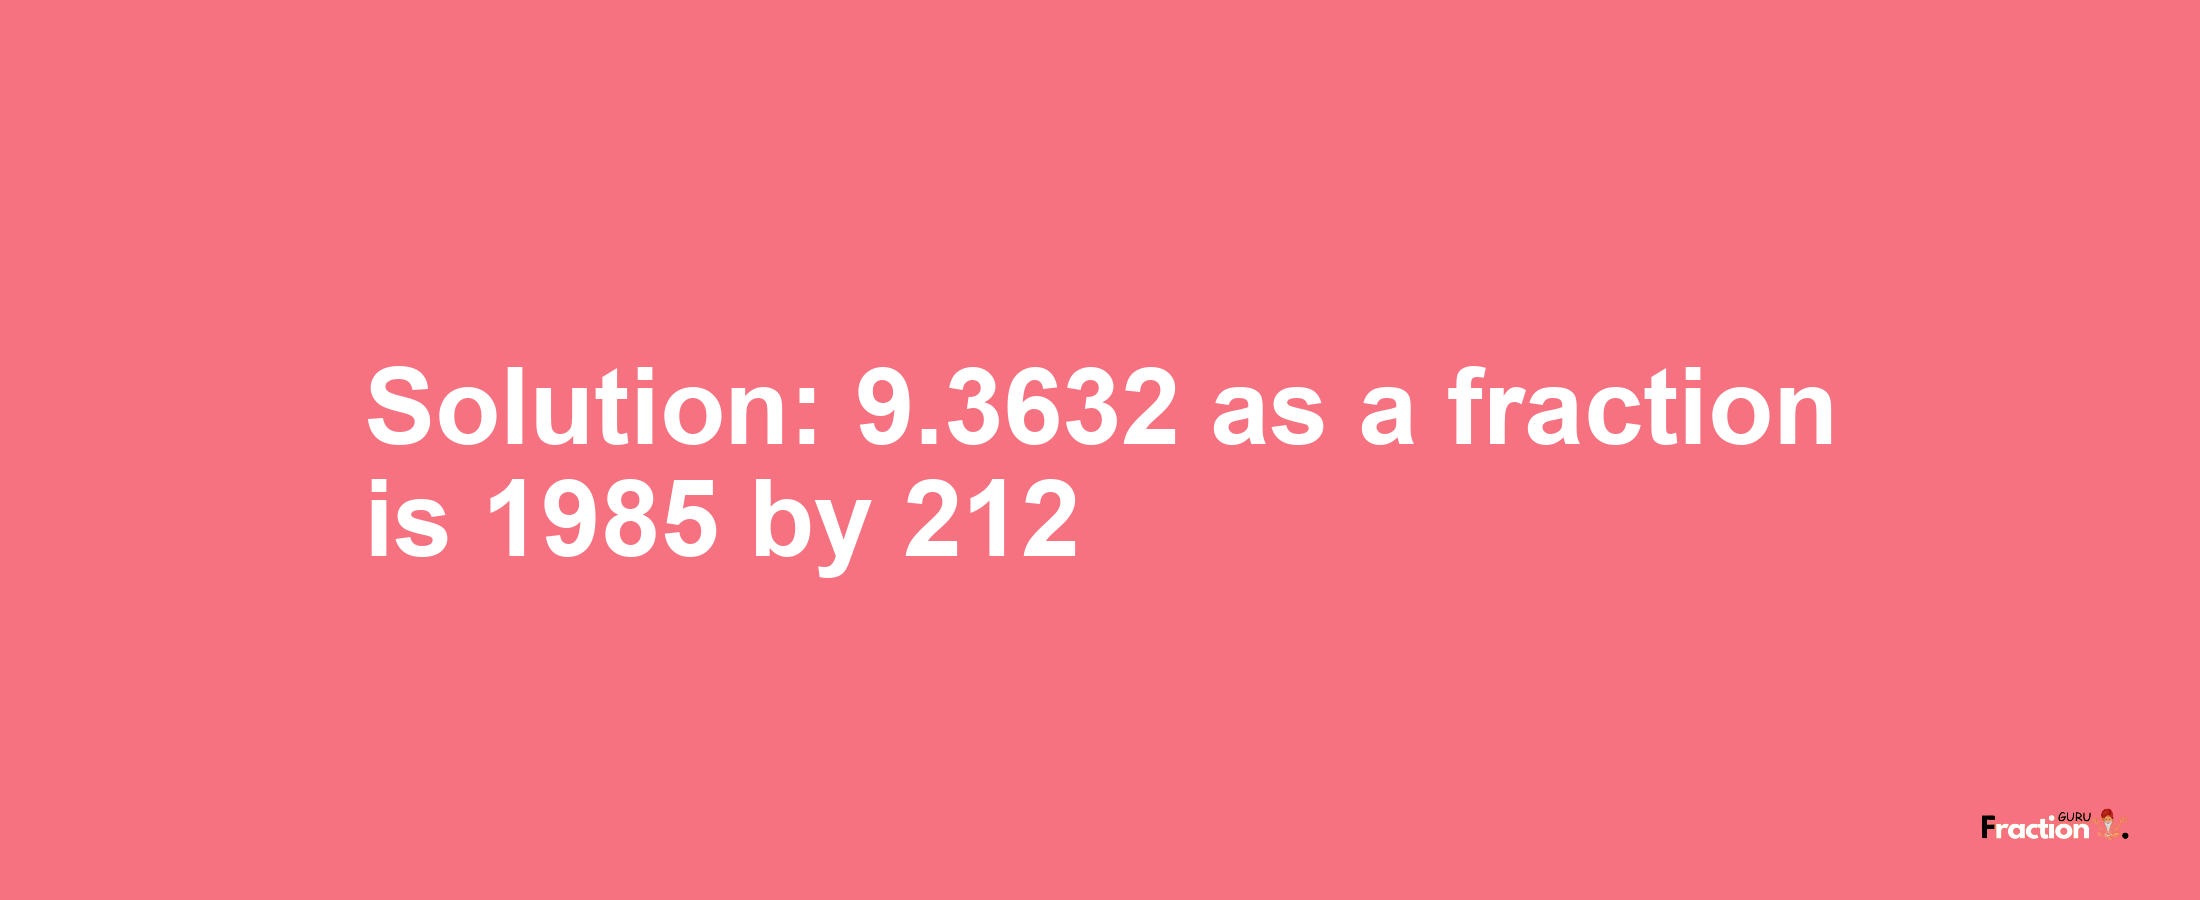 Solution:9.3632 as a fraction is 1985/212